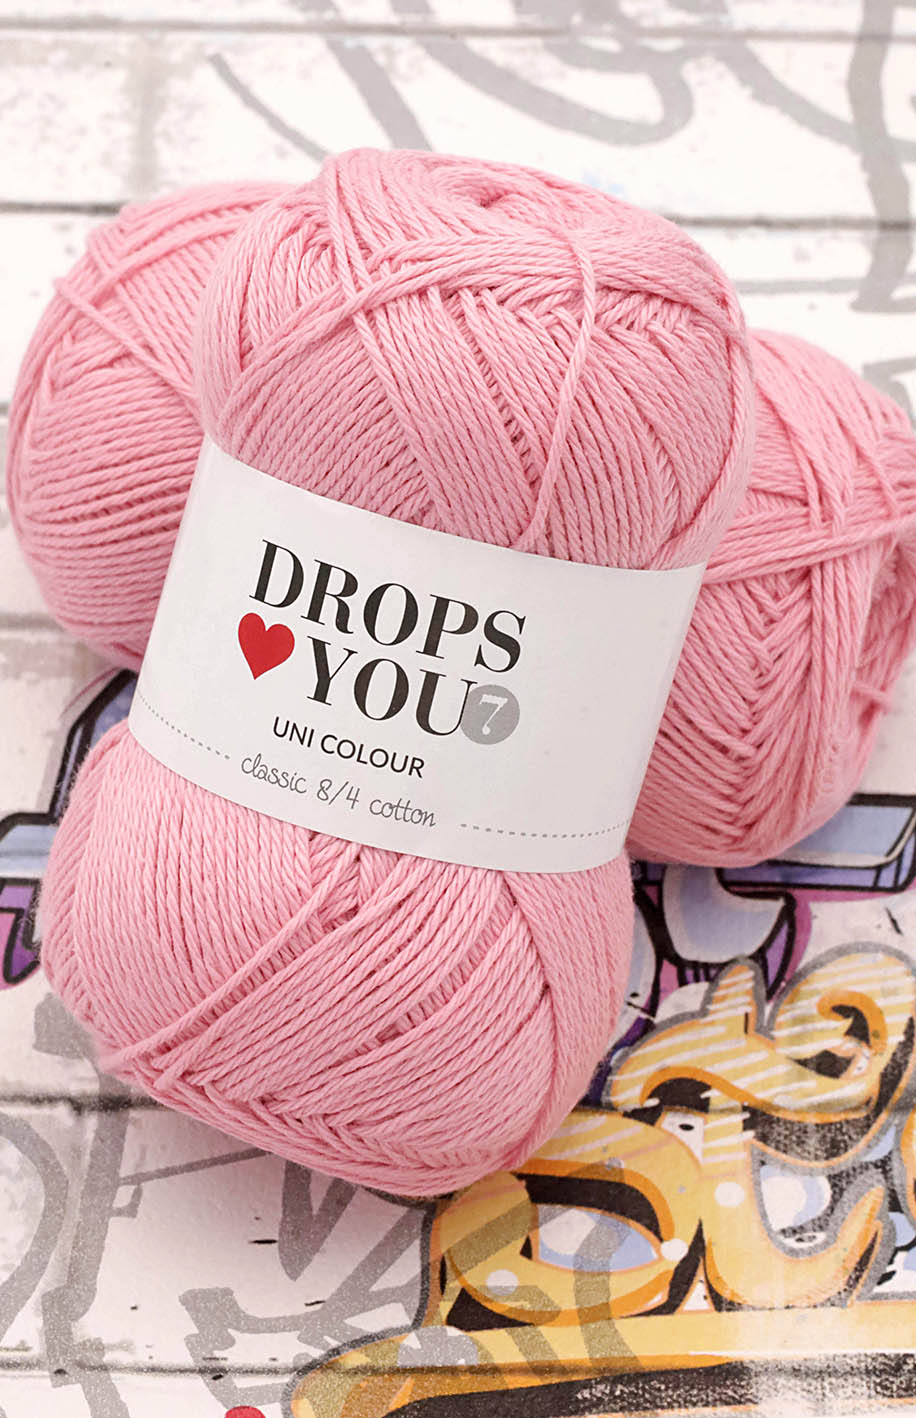 DROPS Loves You 7 - Classic 8/4 cotton